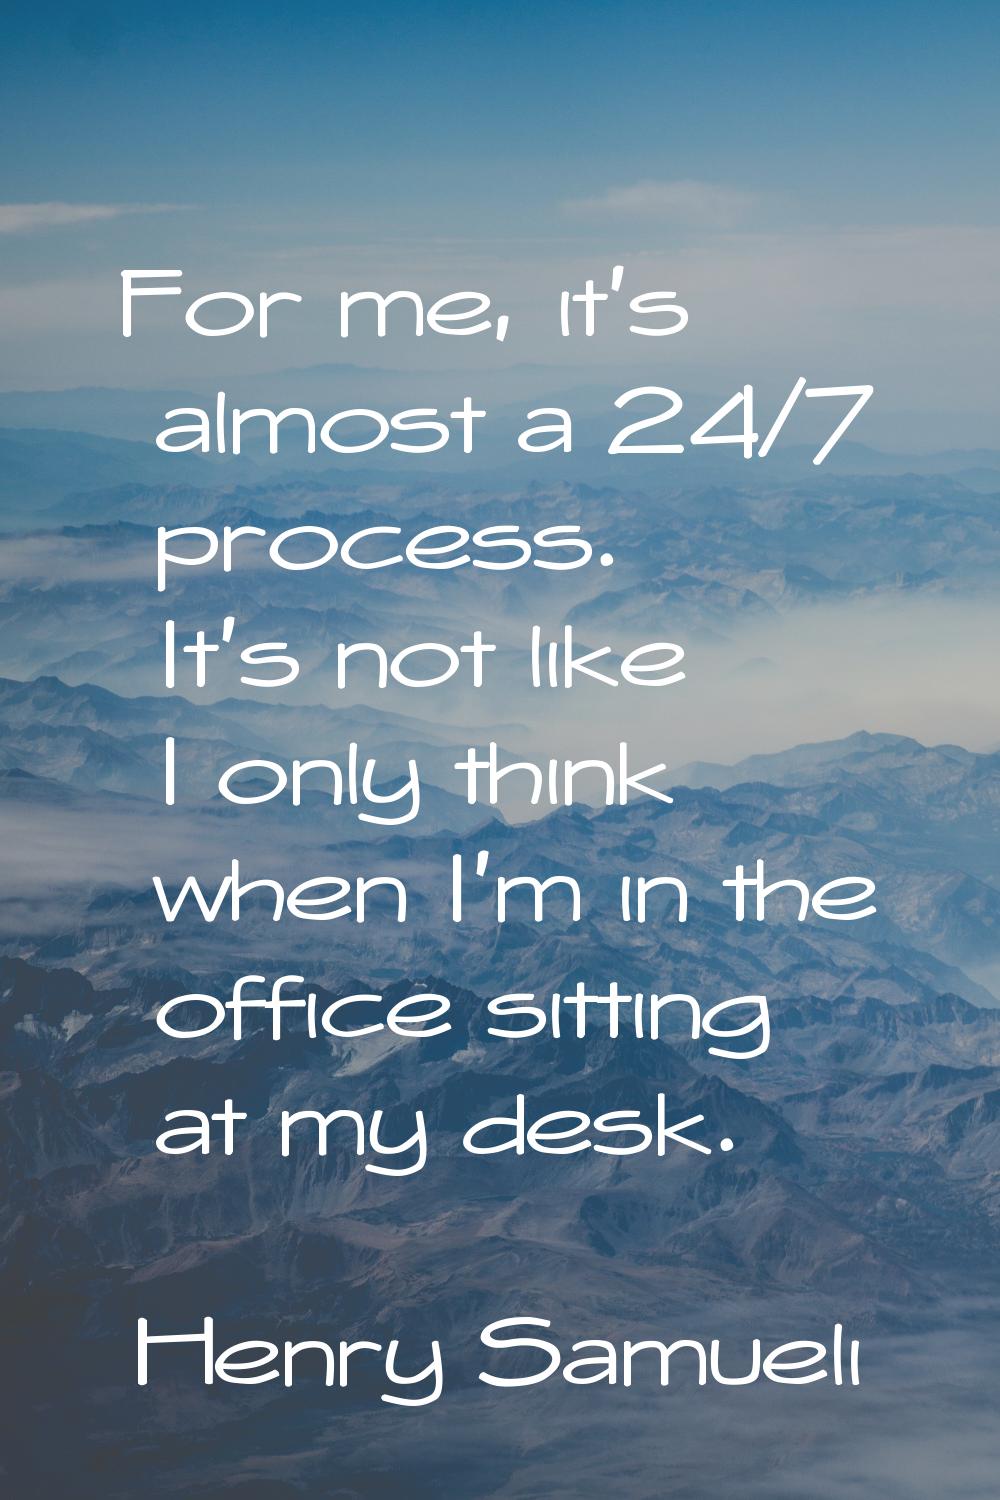 For me, it's almost a 24/7 process. It's not like I only think when I'm in the office sitting at my